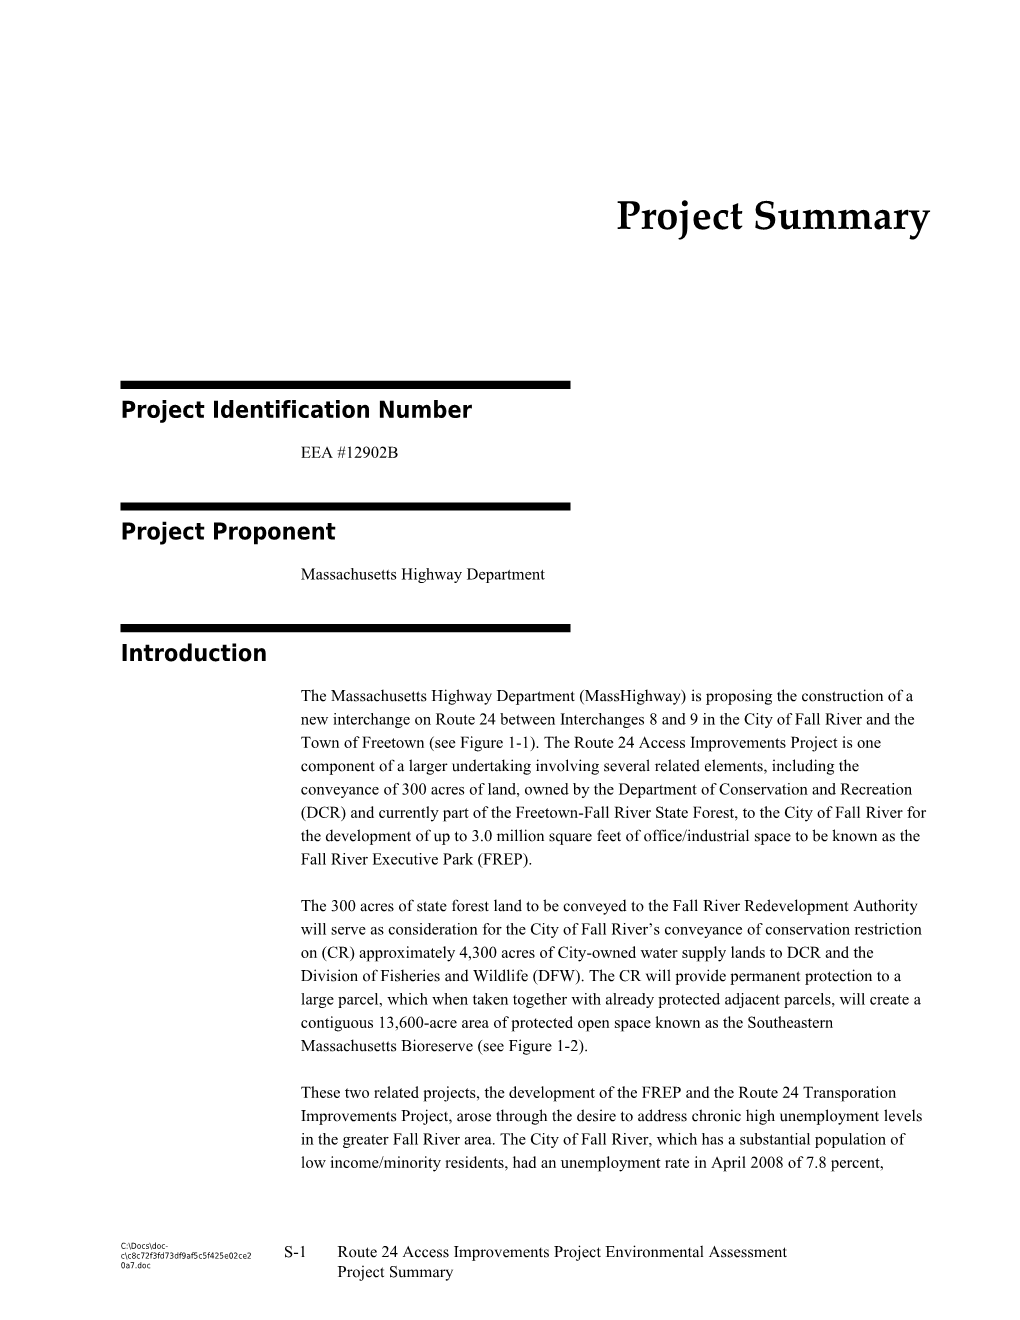 Project Identification Number